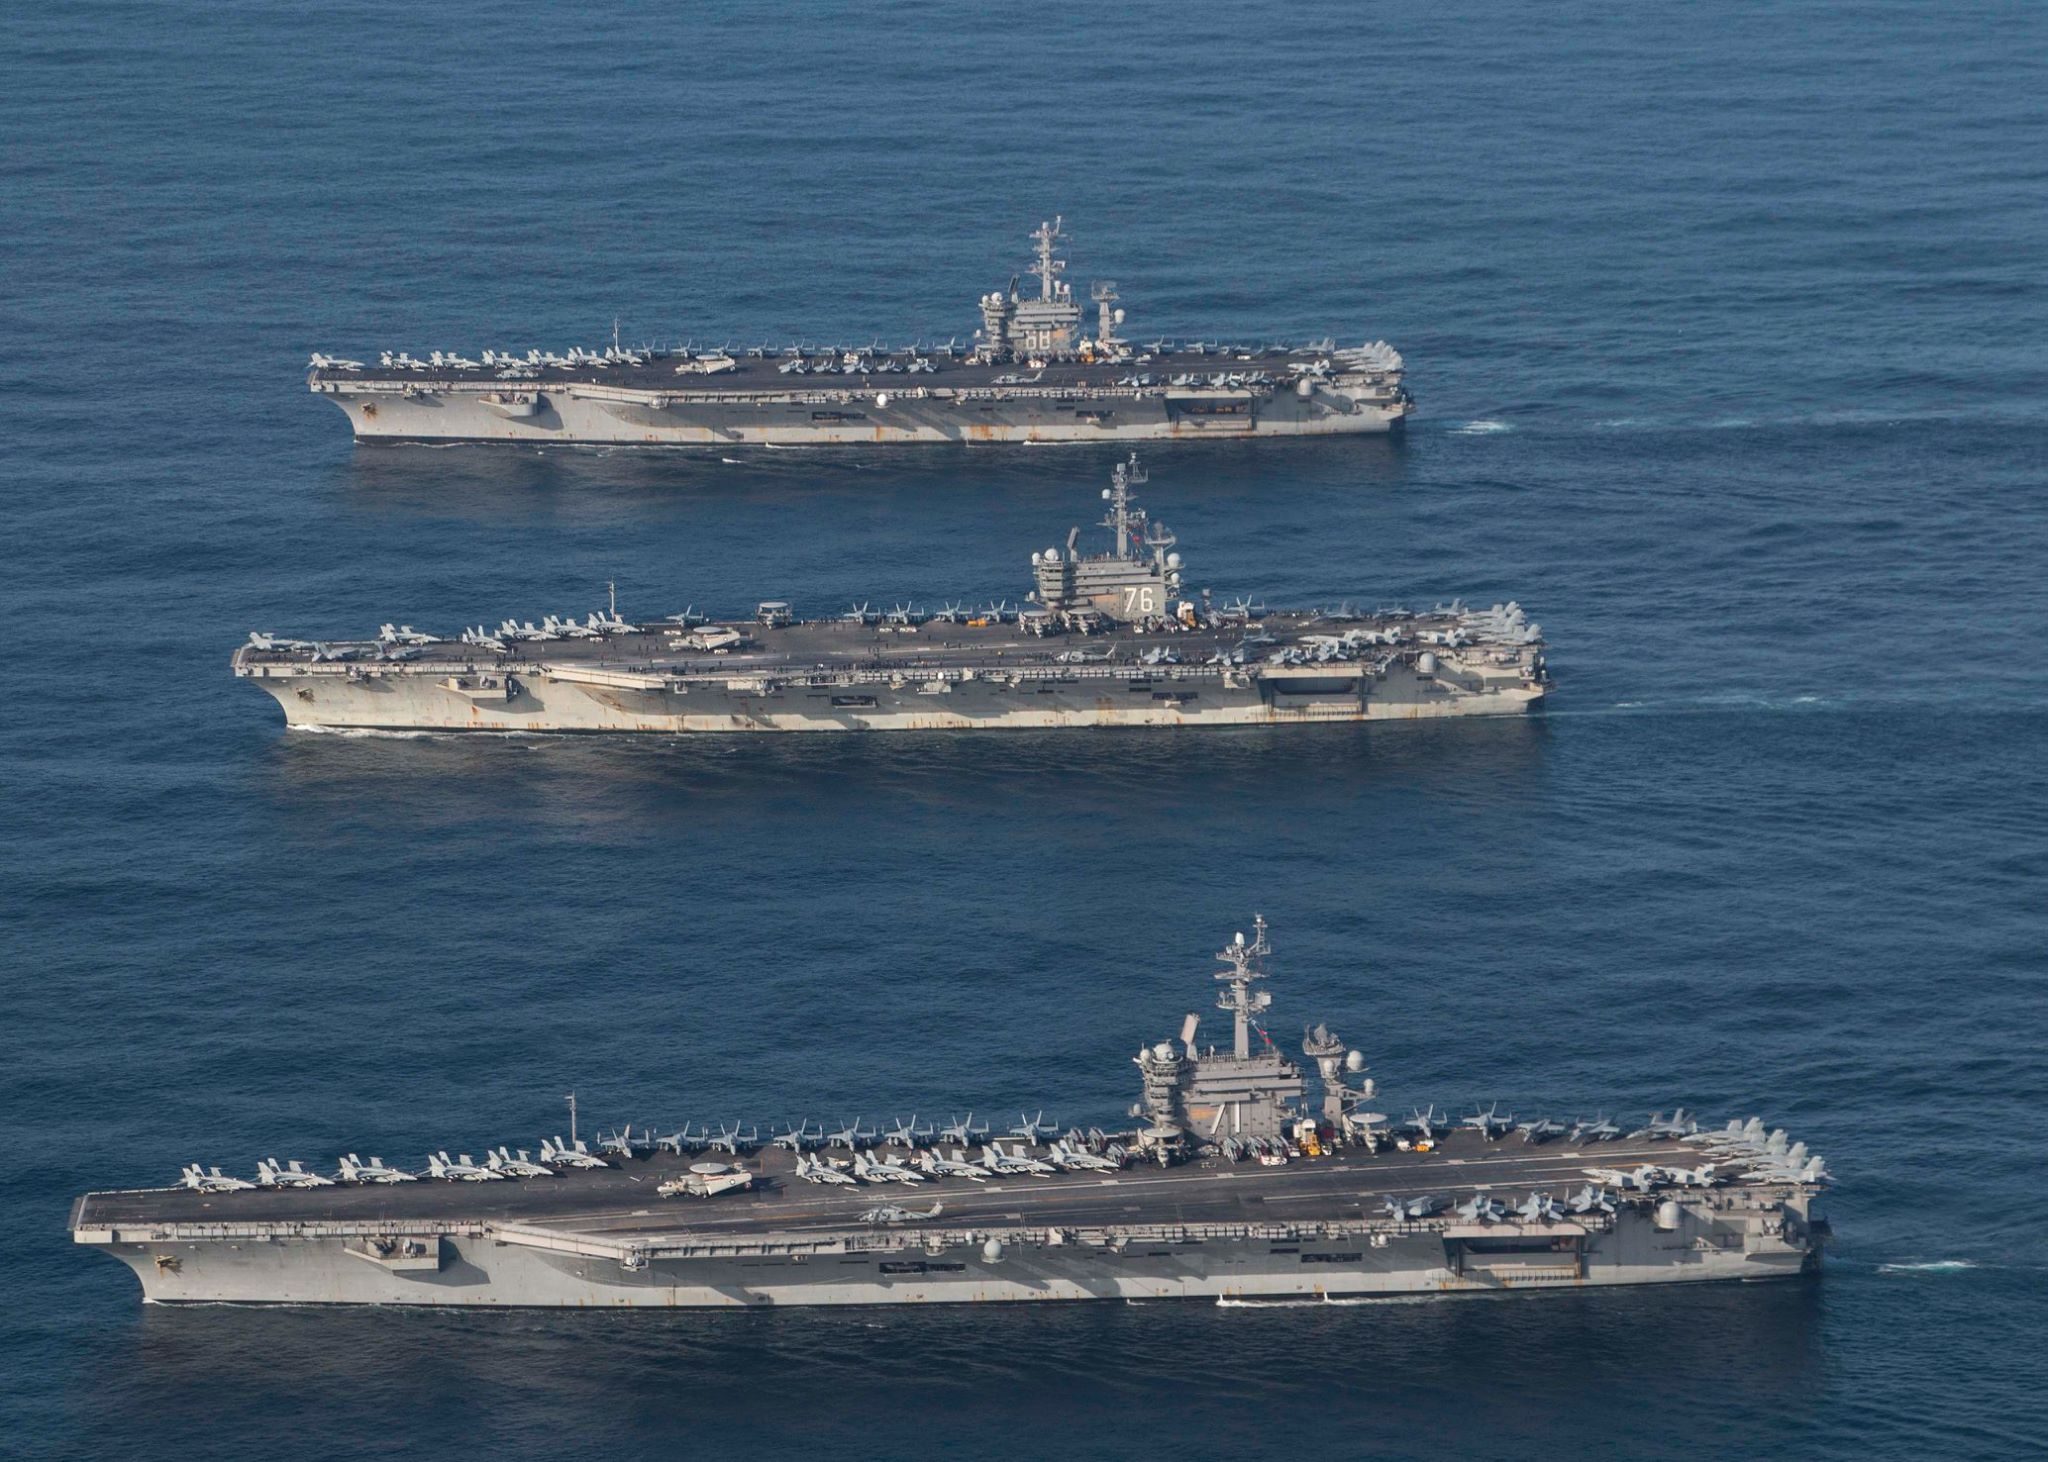 North Korea at UN warns U.S. carriers are fueling tensions